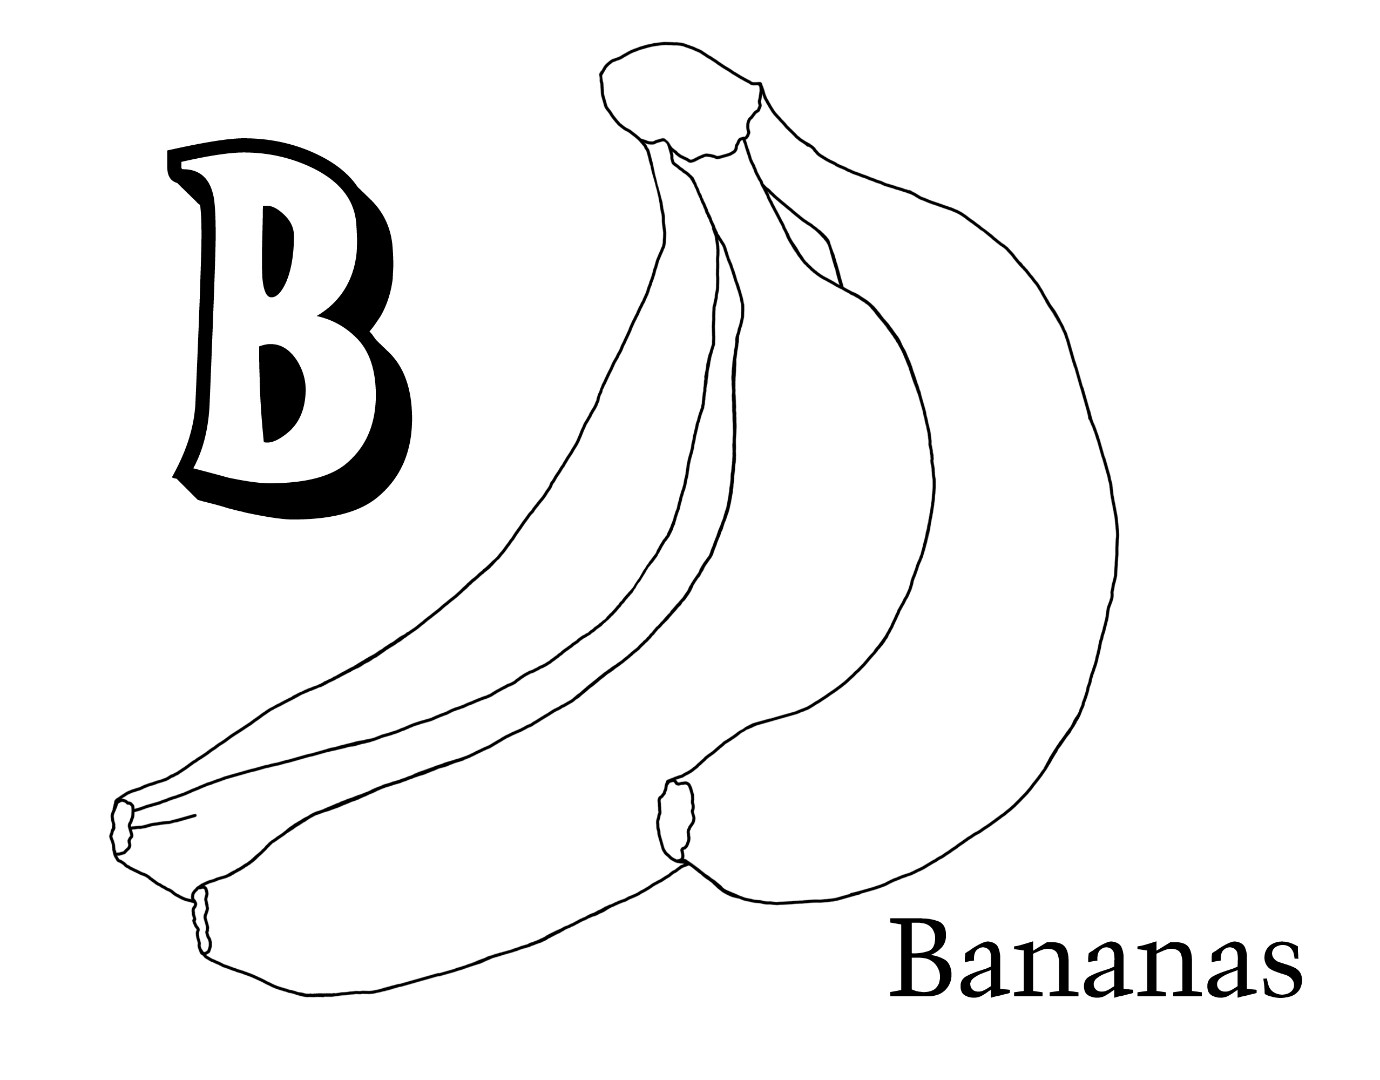 Banana Split Coloring Page Banana Coloring Pages To Download And Print For Free